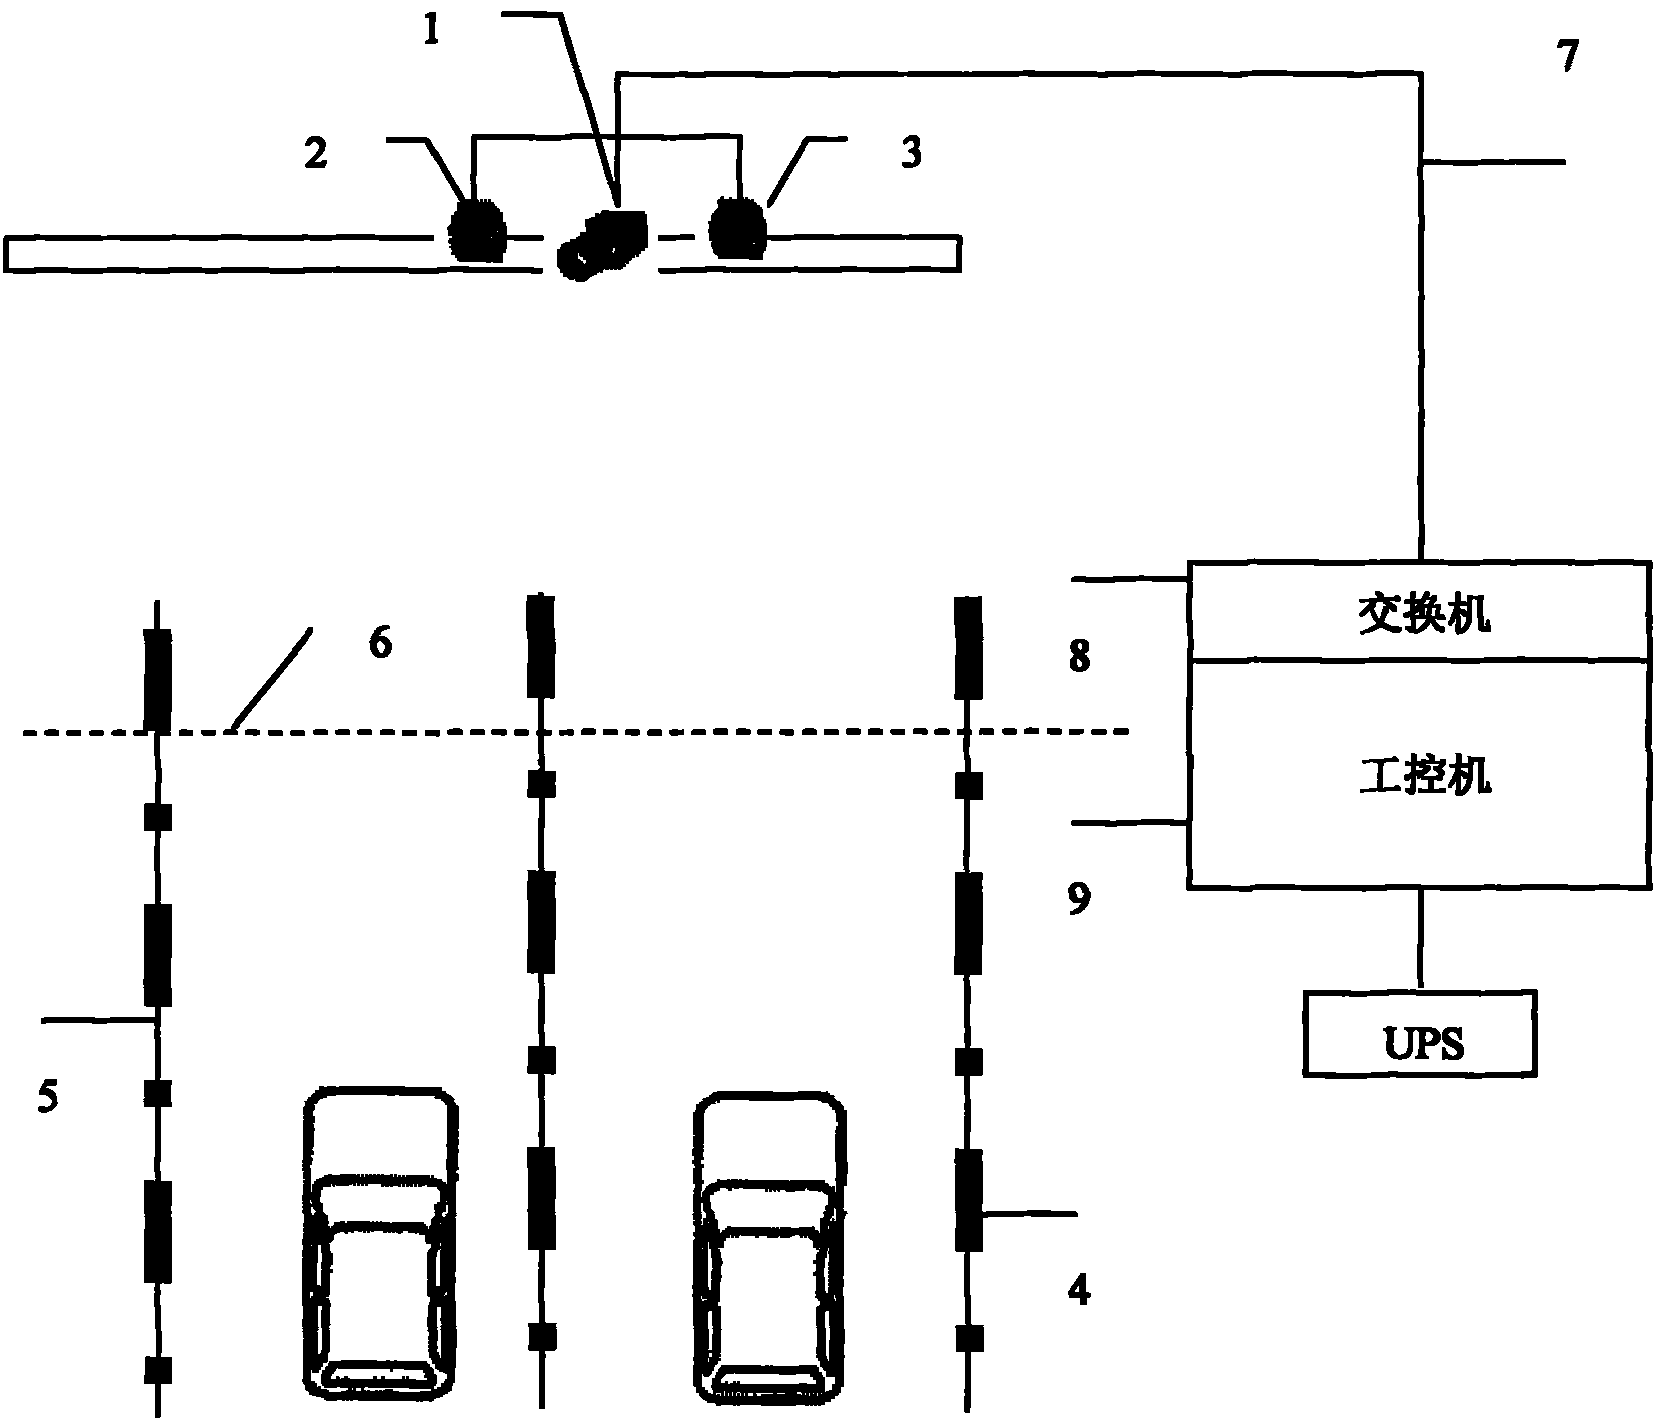 License tag recognizing and vehicle speed measuring method based on videos